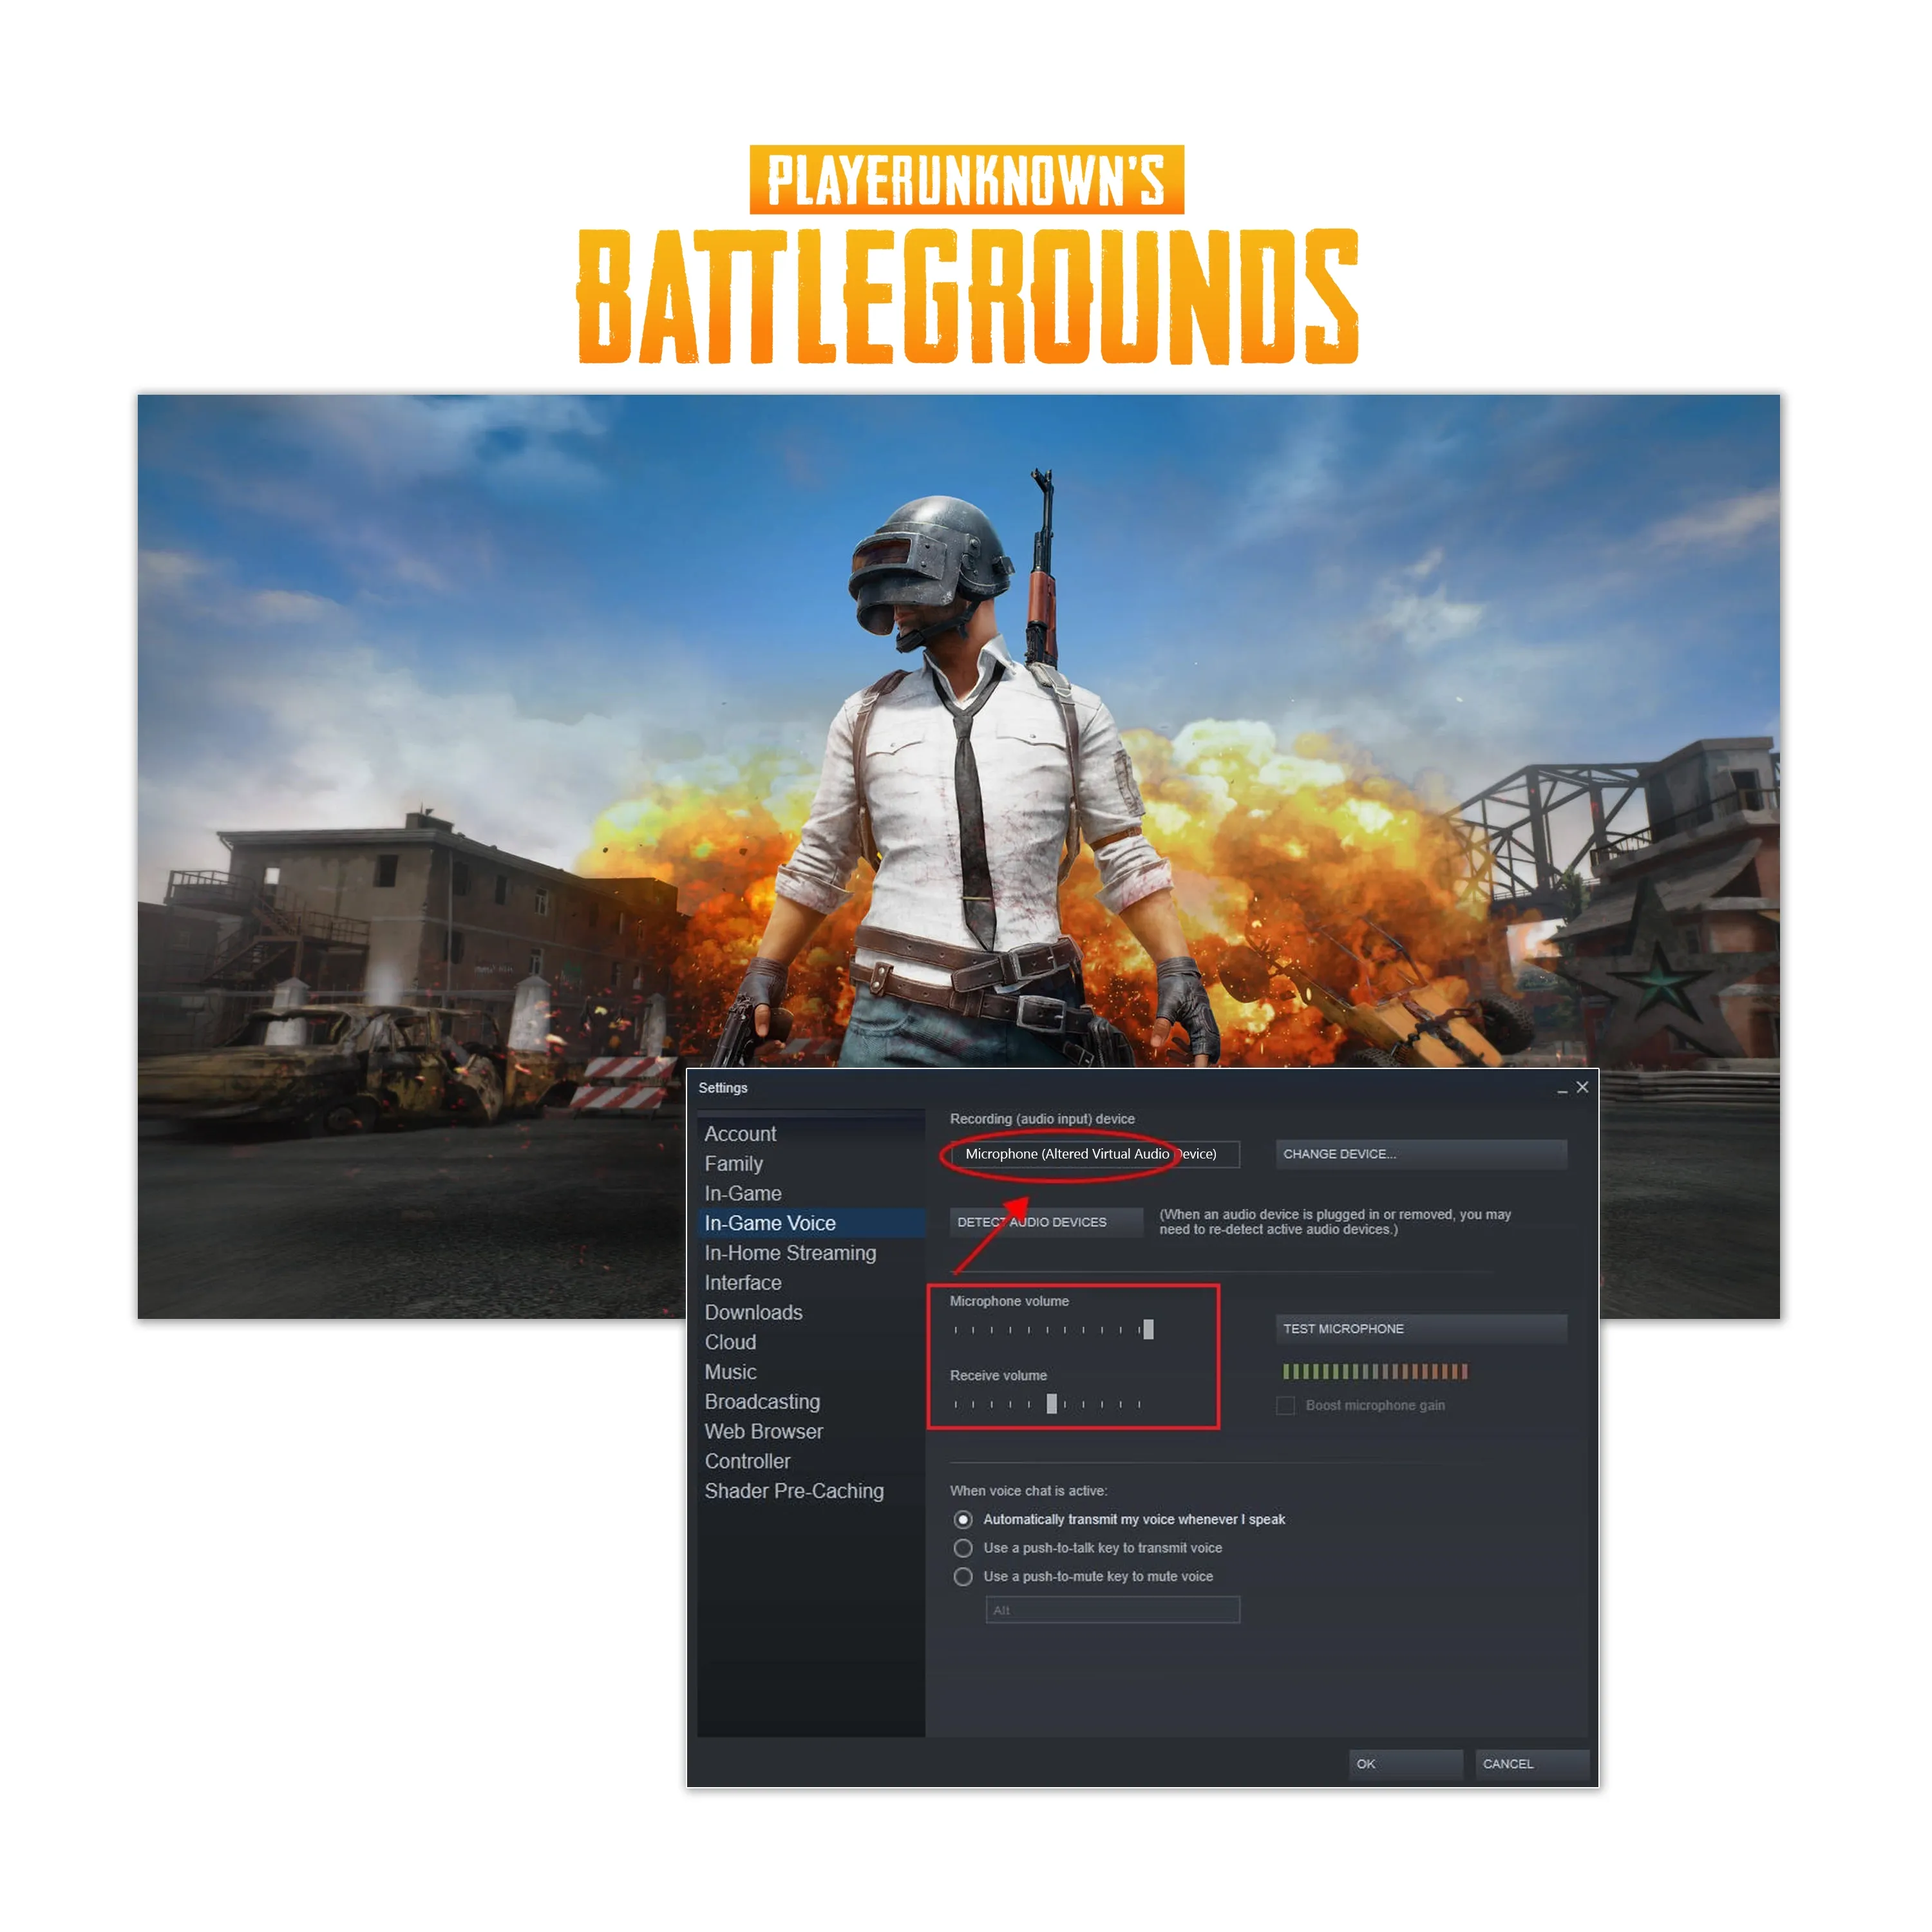 How to use Real-Time in PUBG Battlegrounds